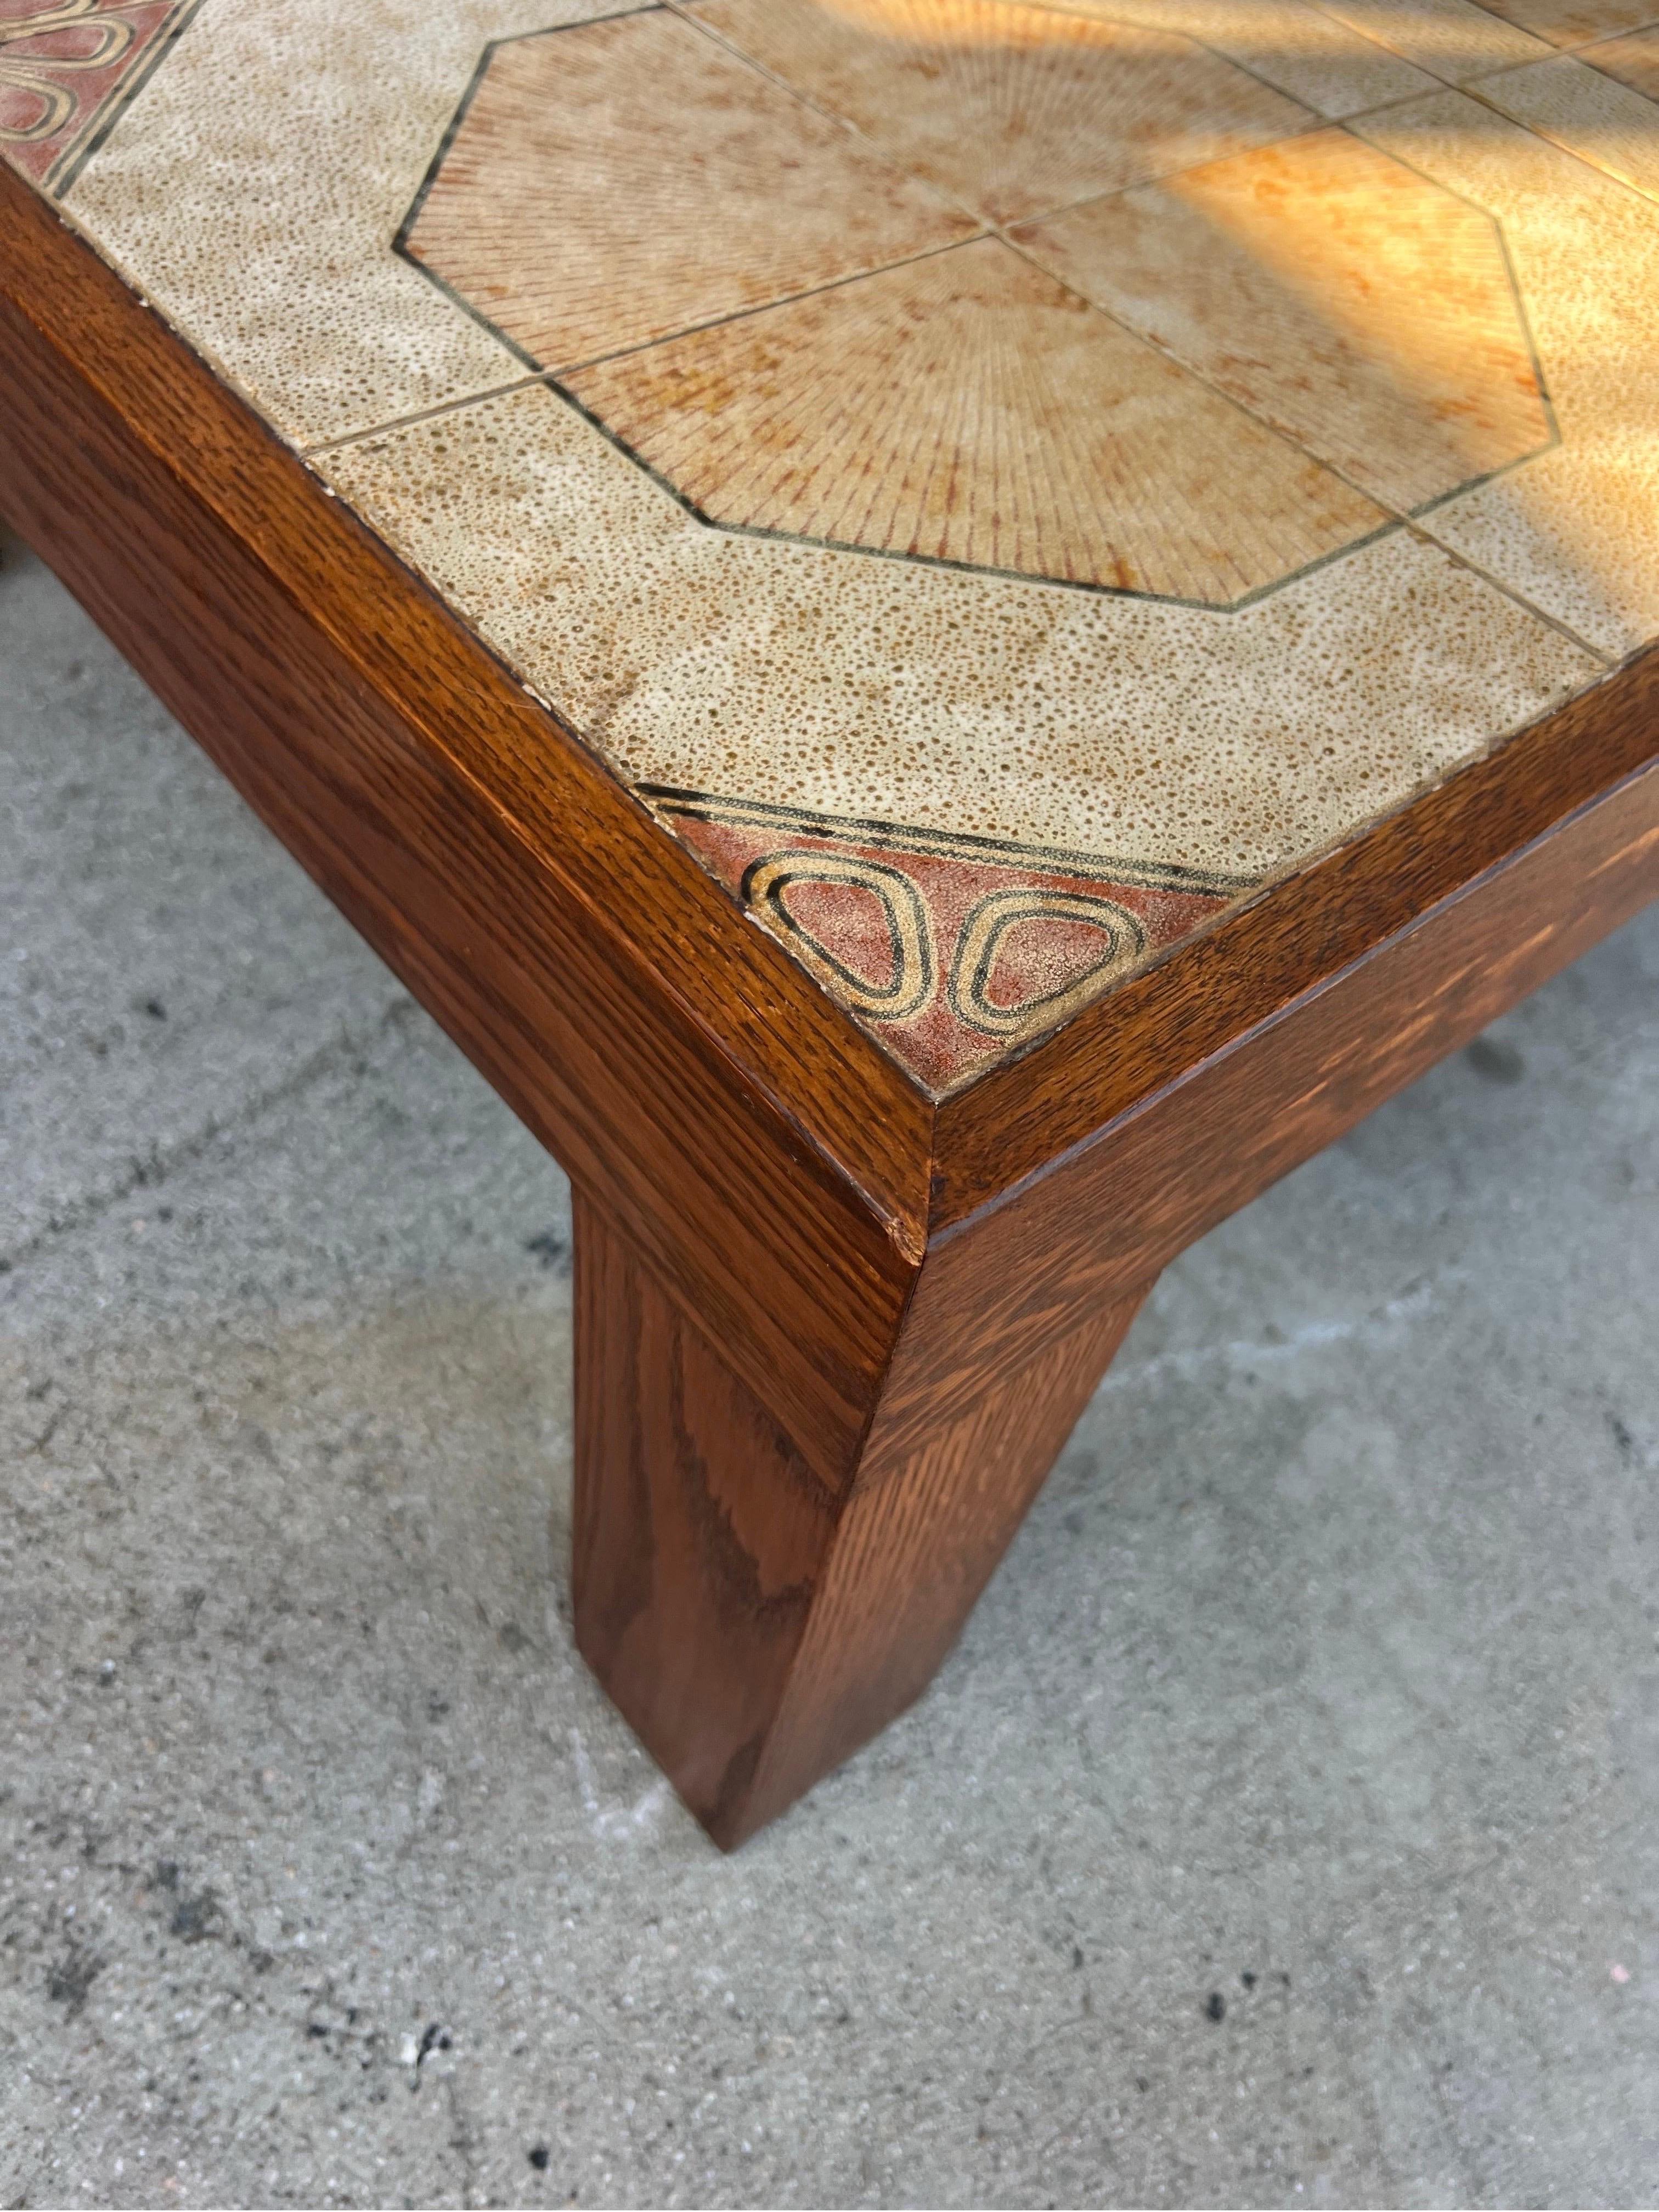 A gorgeous parsons style red oak console table with inlaid tile tops. Tile style was marked as “Sorento” under its coffee table partner (sold) . No chips or cracks in any tiles. Minor wear to the wood frame. Heavy and well made. 

L 49” x d 17.5” x